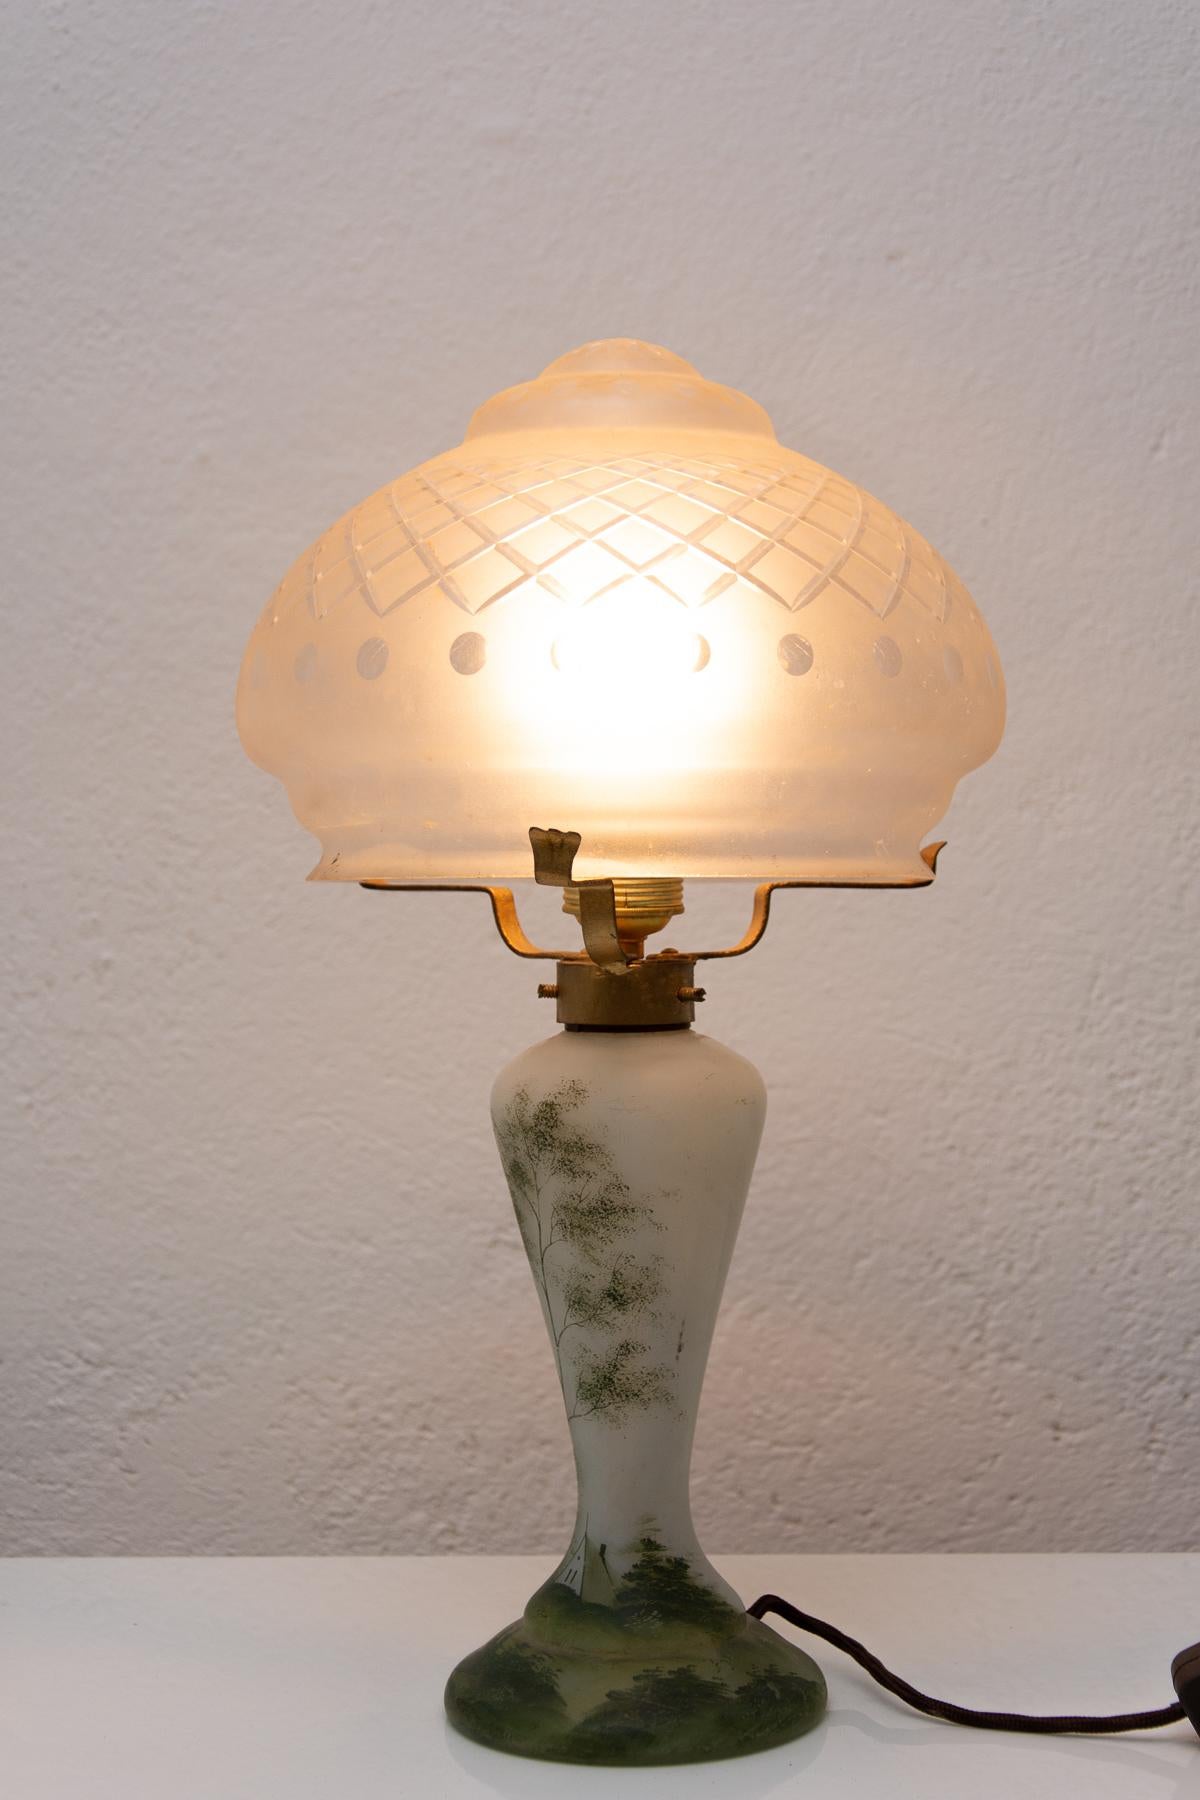 This glass ART DECO lamp was made in the former Czechoslovakia in the 1930´s. The lamp stands out for its extraordinary shapes typical of the Art Deco period. Overall, it is in very good condition, has a new wiring.